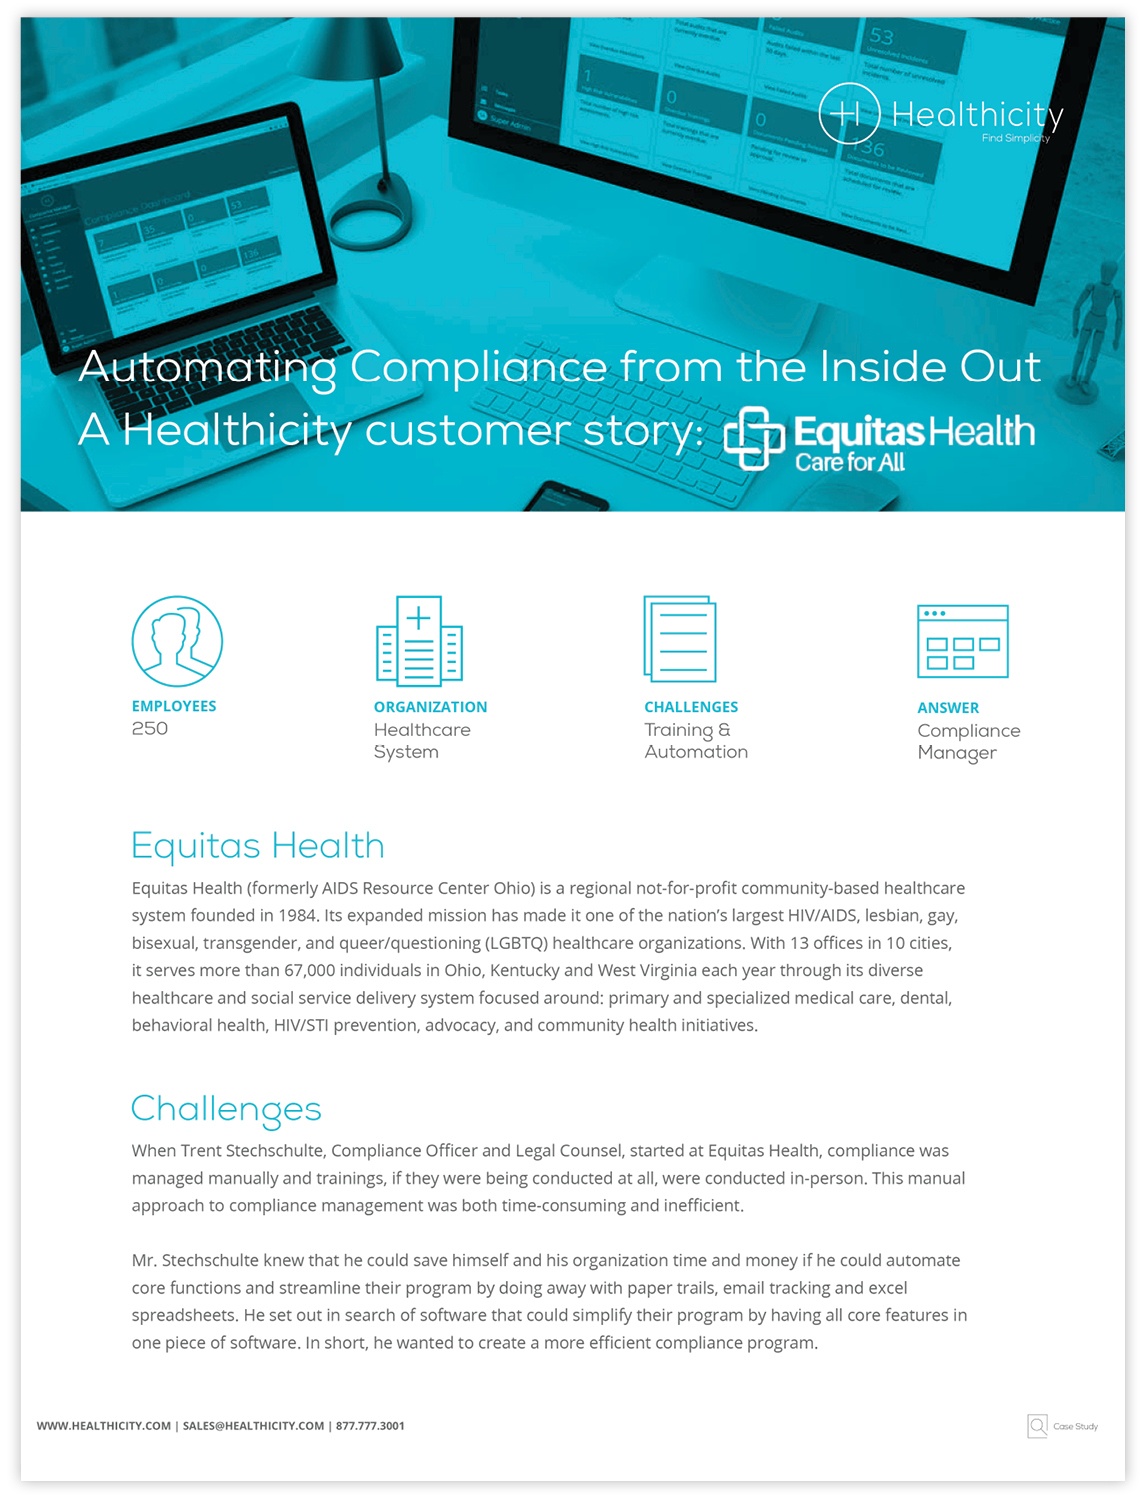 Download the Equitas Compliance Case Study